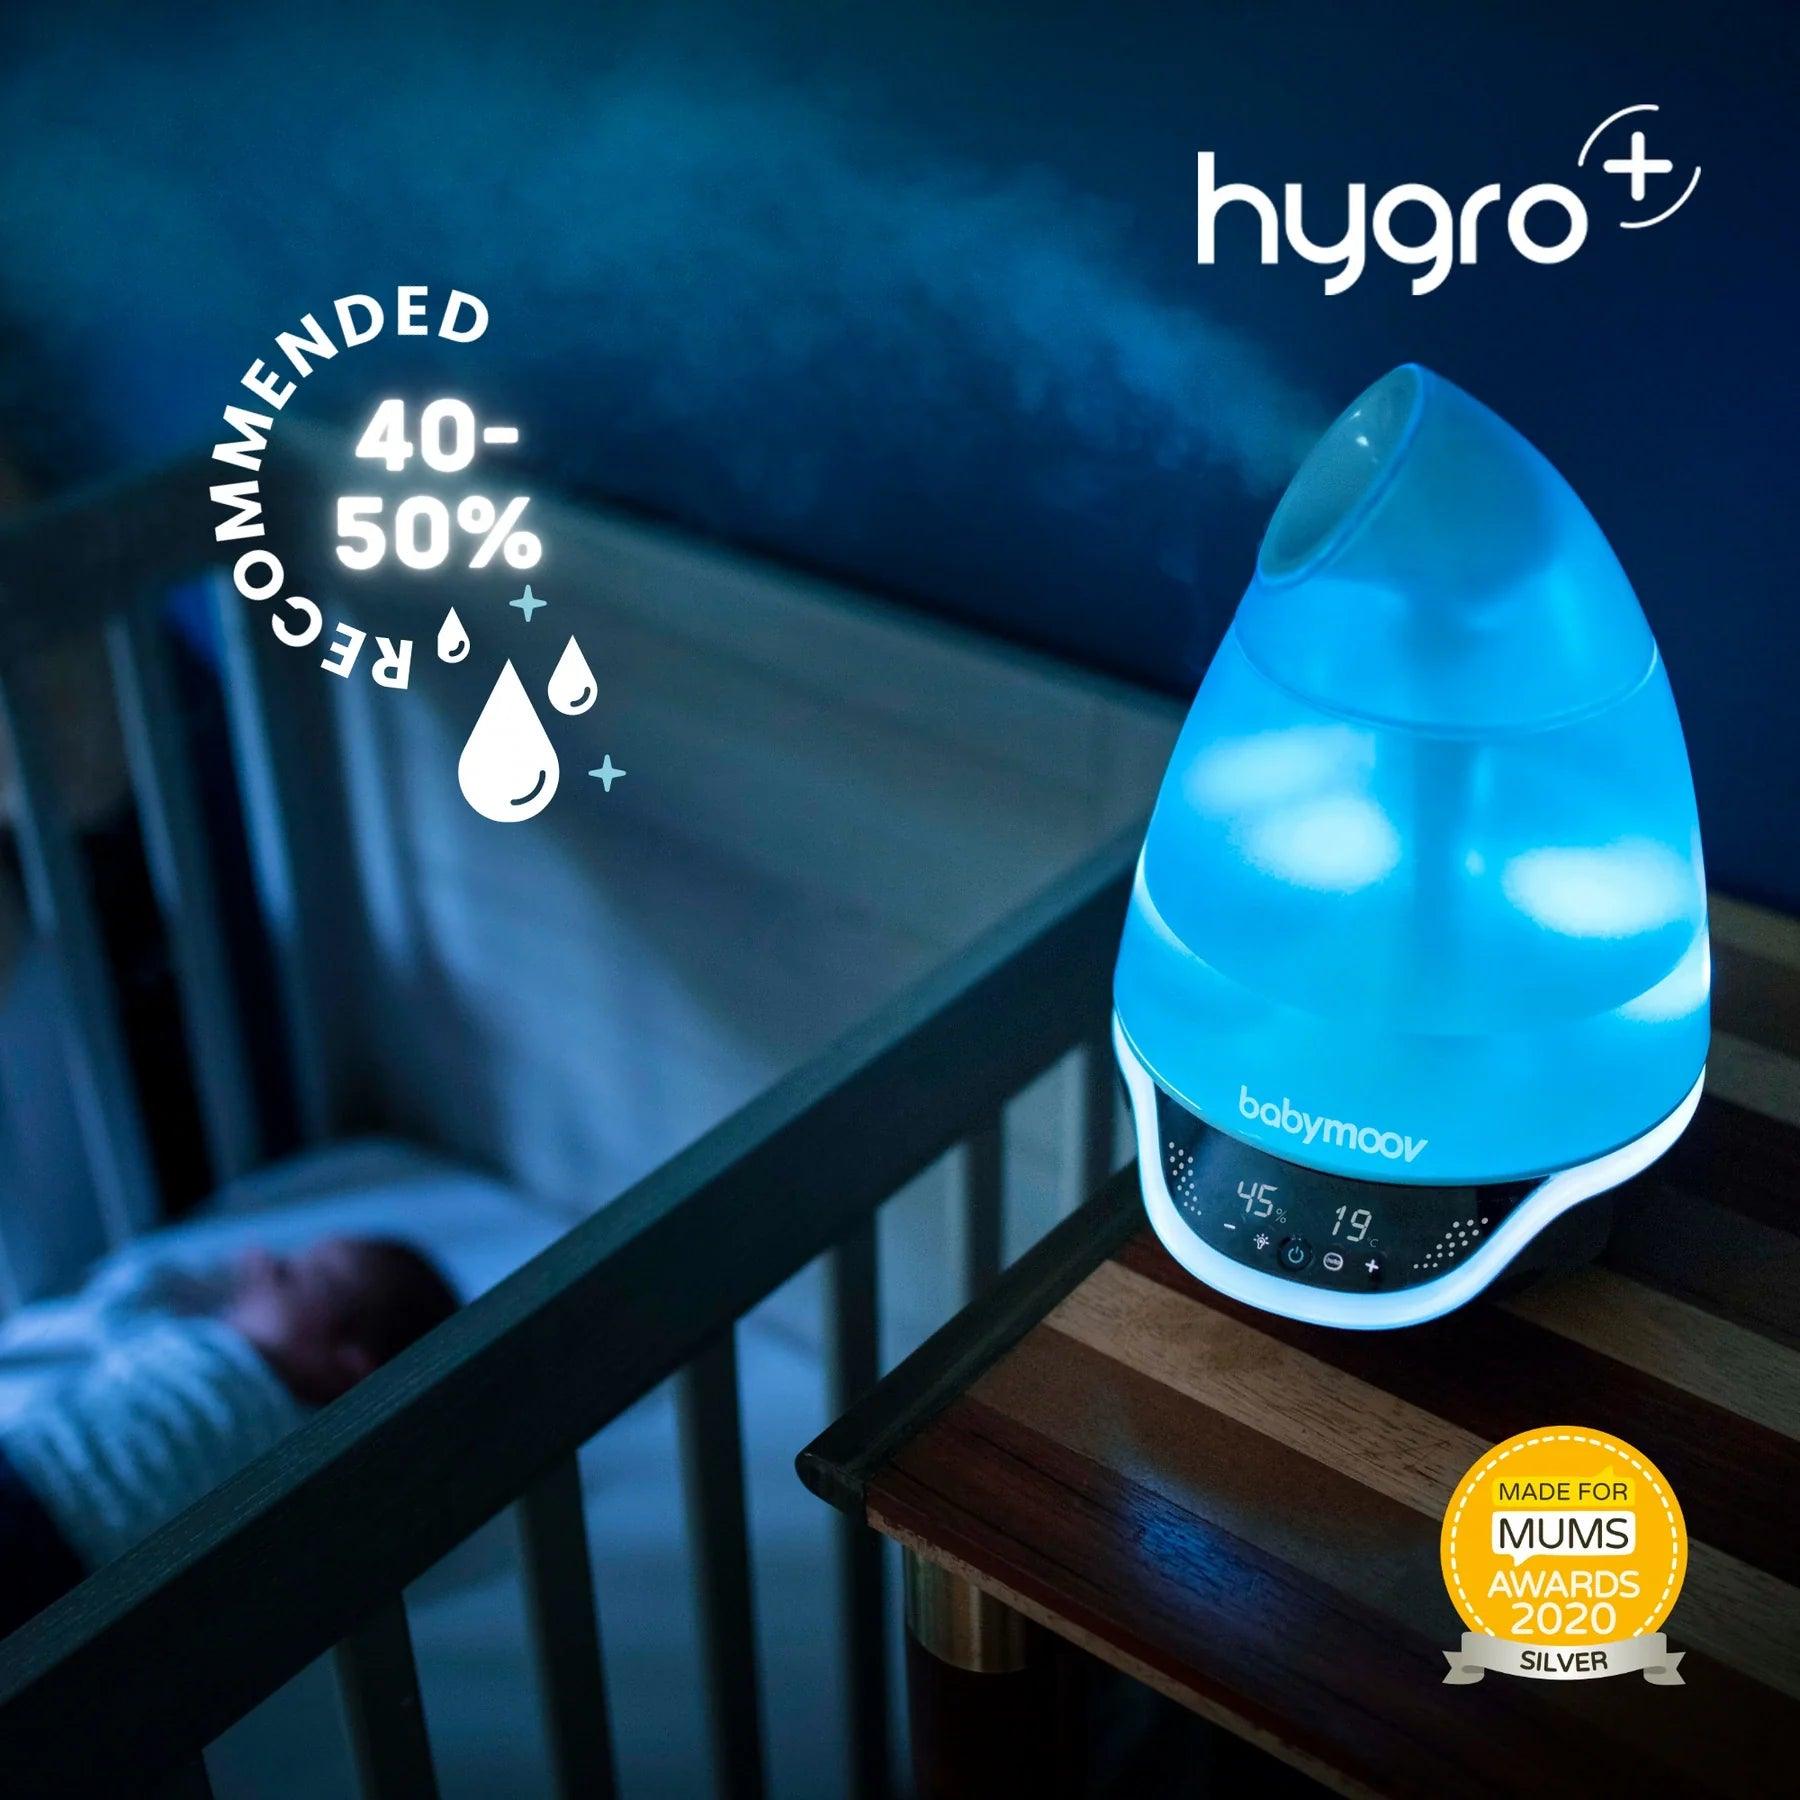 Babymoov Hygro Plus 3in1 Baby Humidifier | The Nest Attachment Parenting Hub